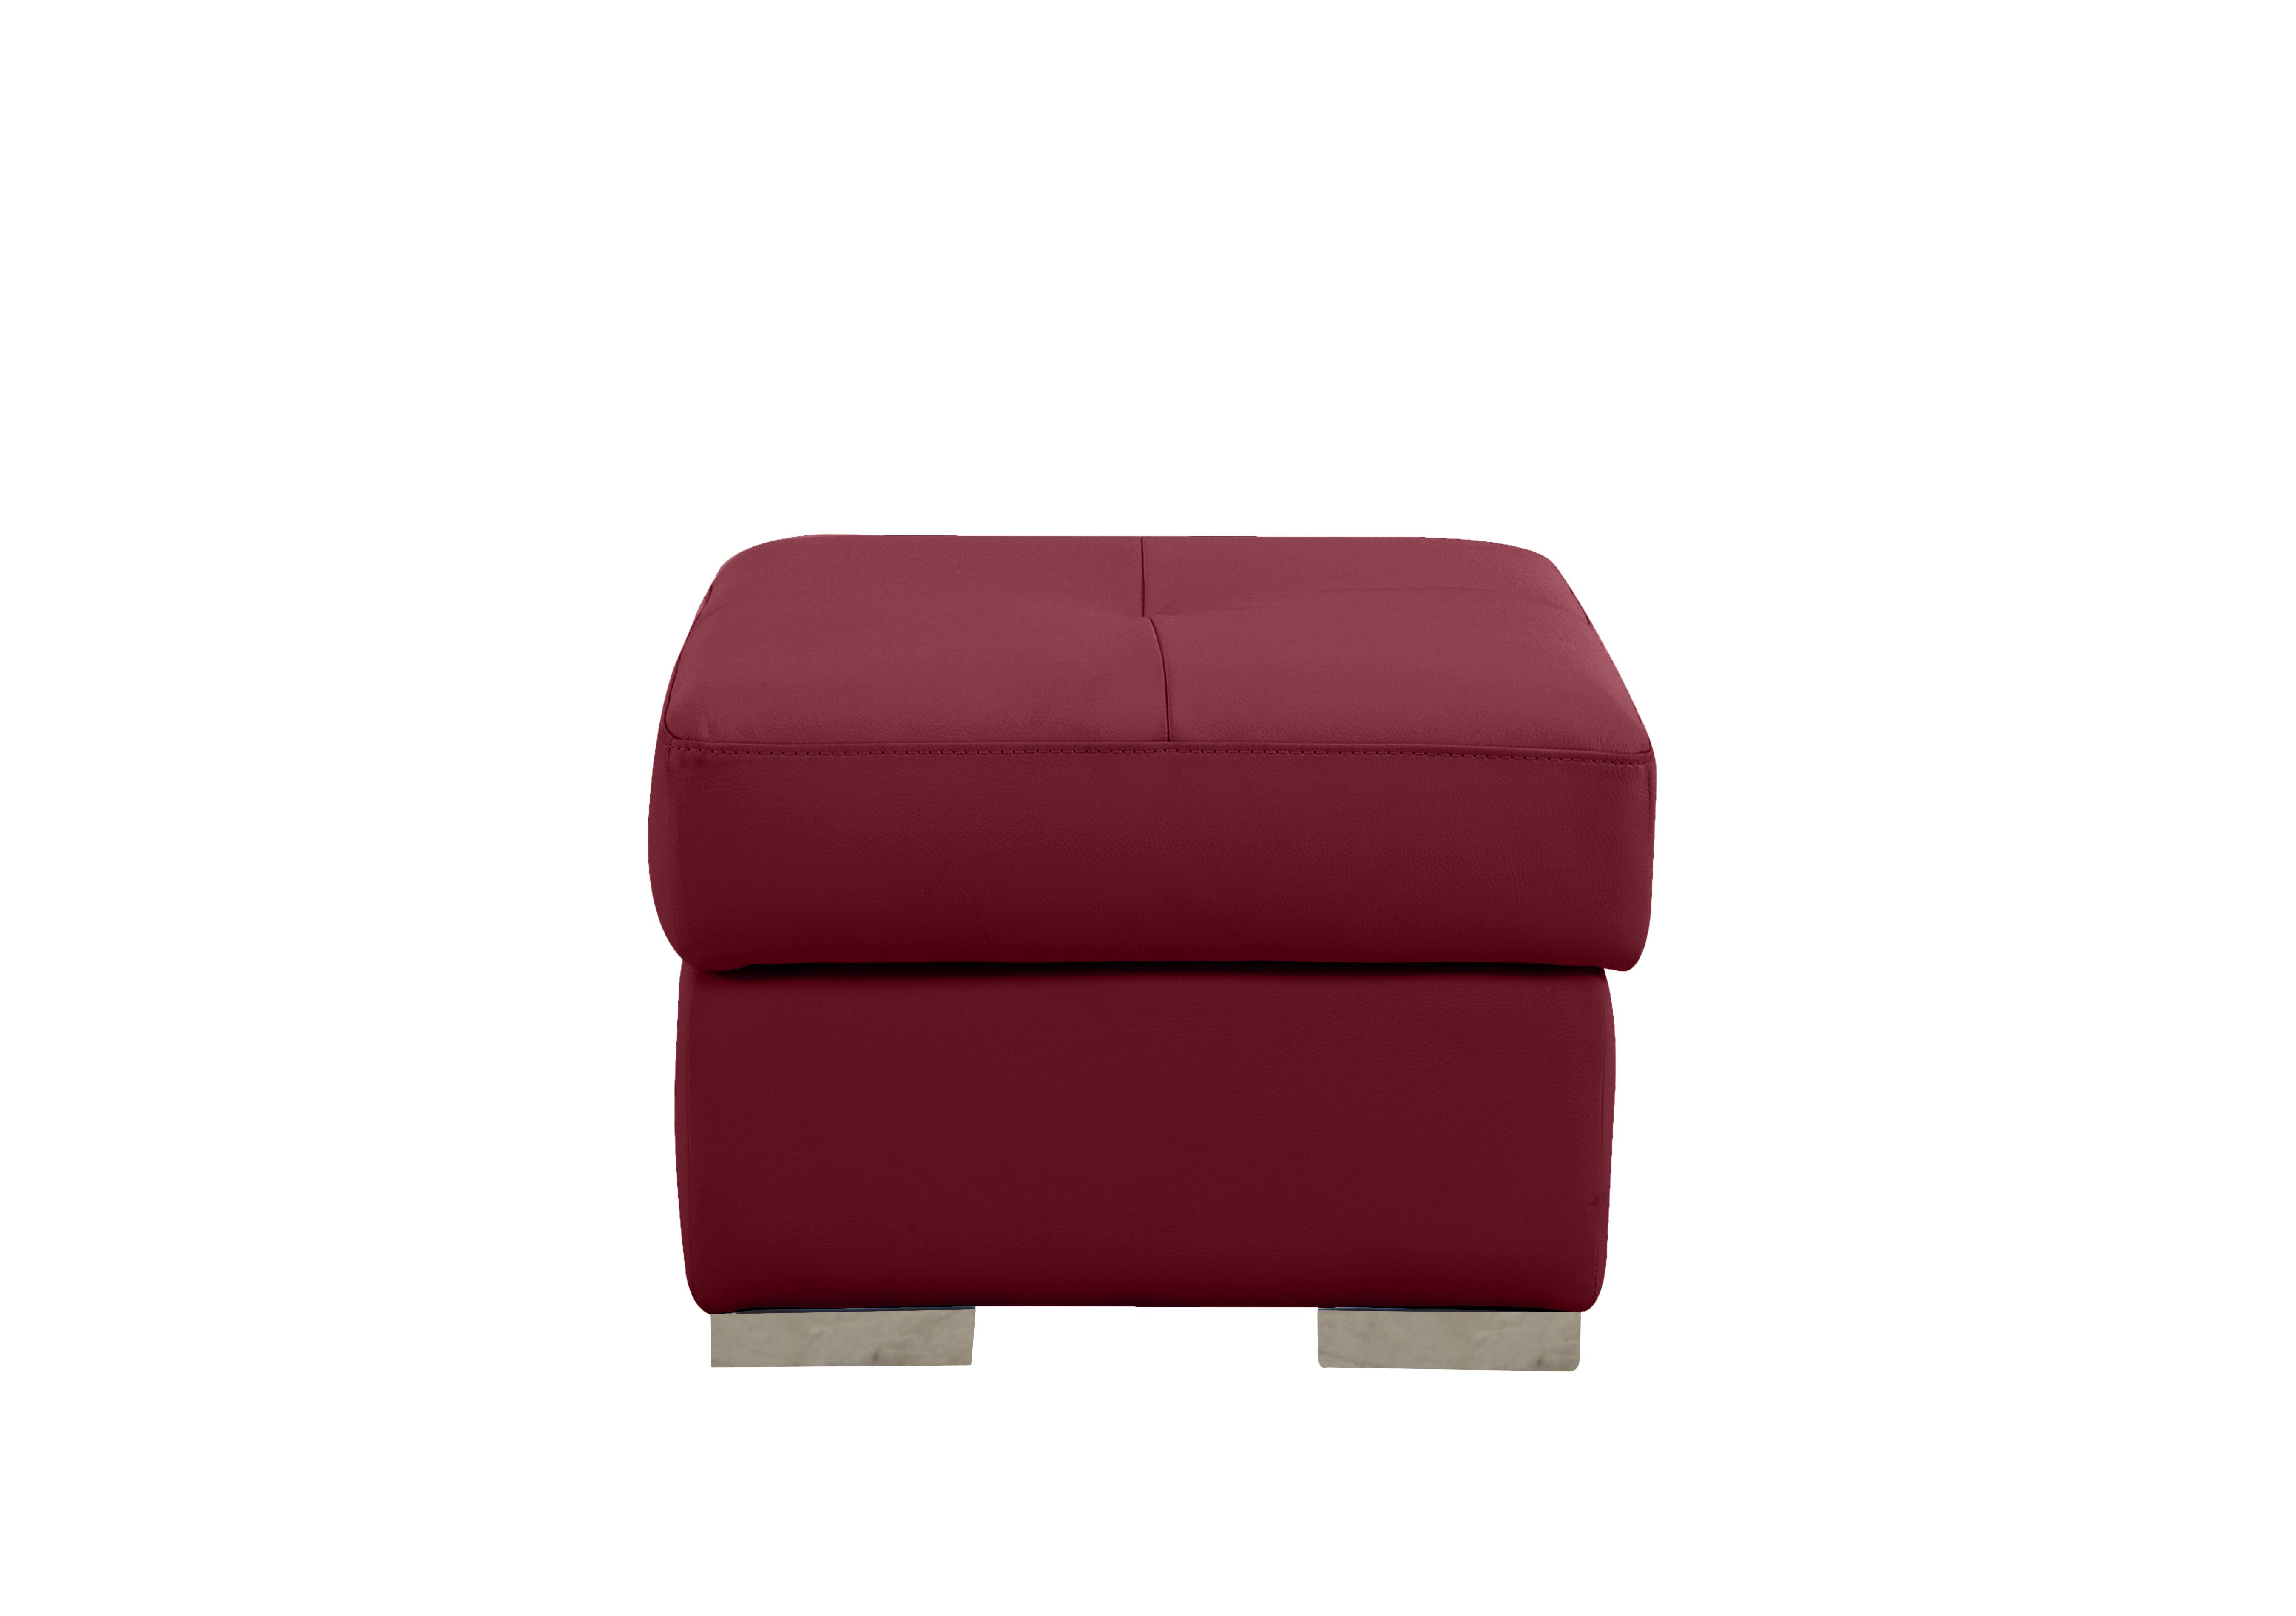 Galileo Leather Storage Footstool in Dali Bordeaux 1521 Ch on Furniture Village